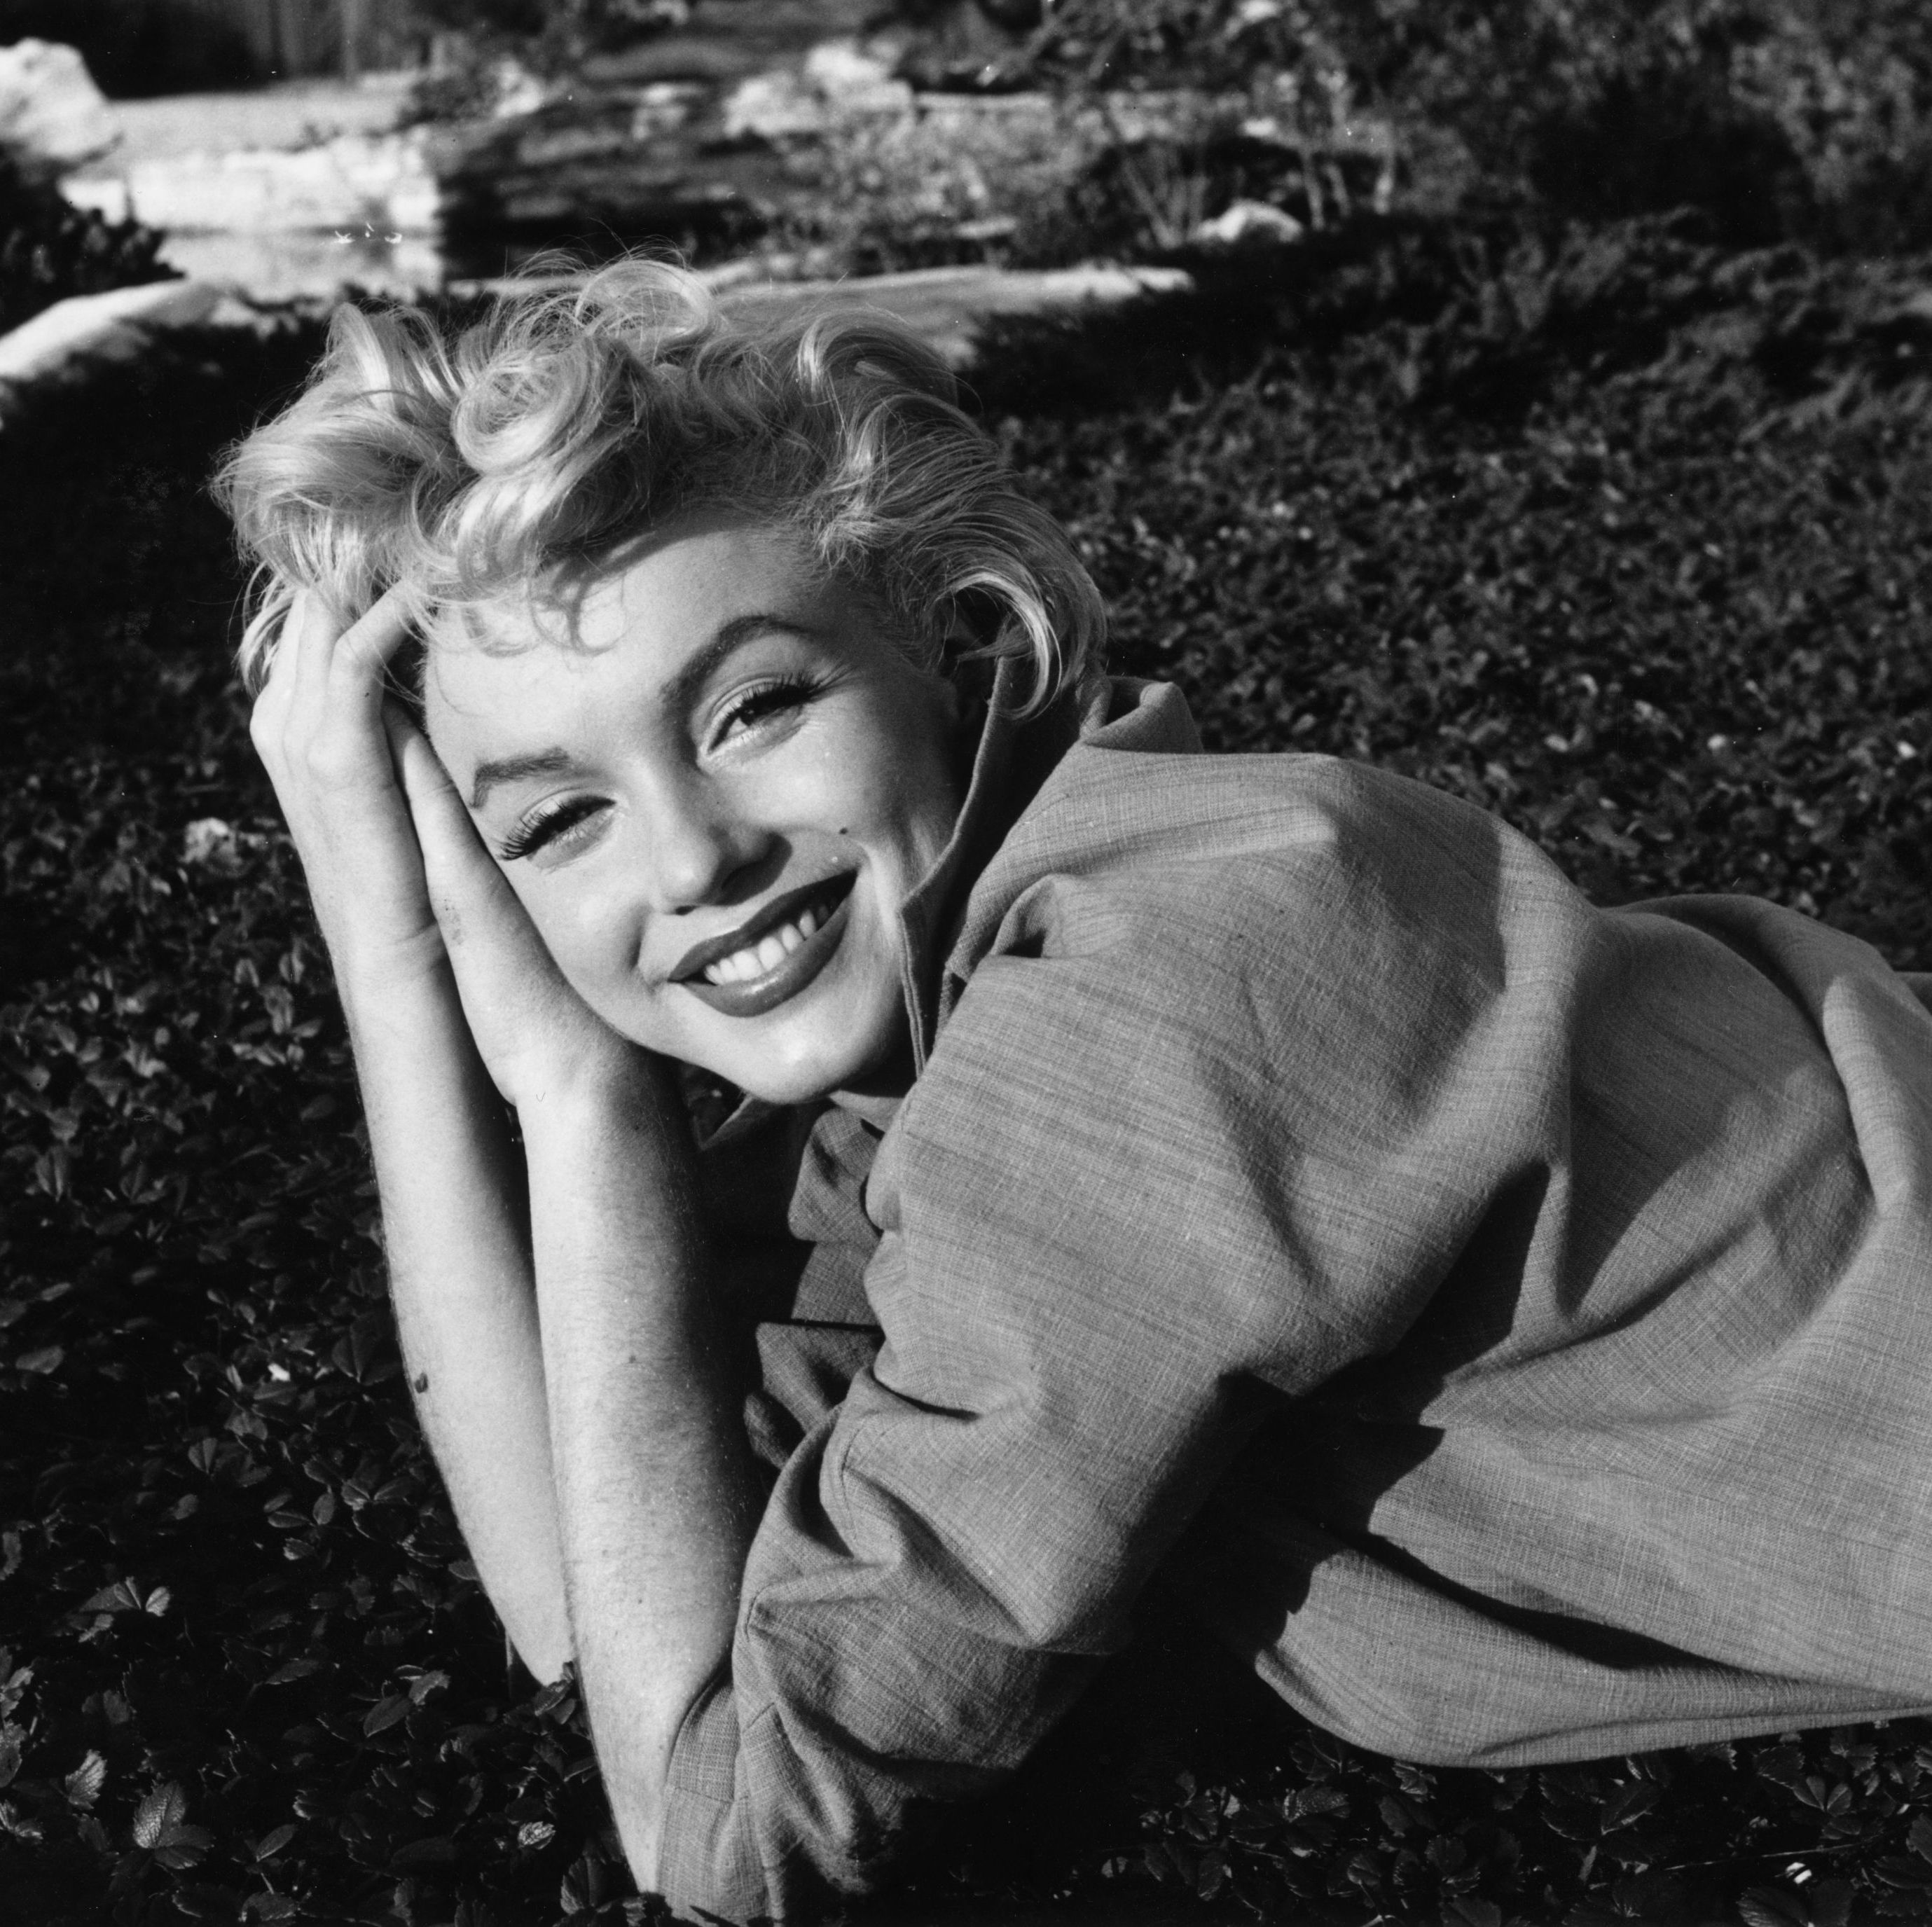 Marilyn Monroe's House Was Saved From Demolition. For Now.